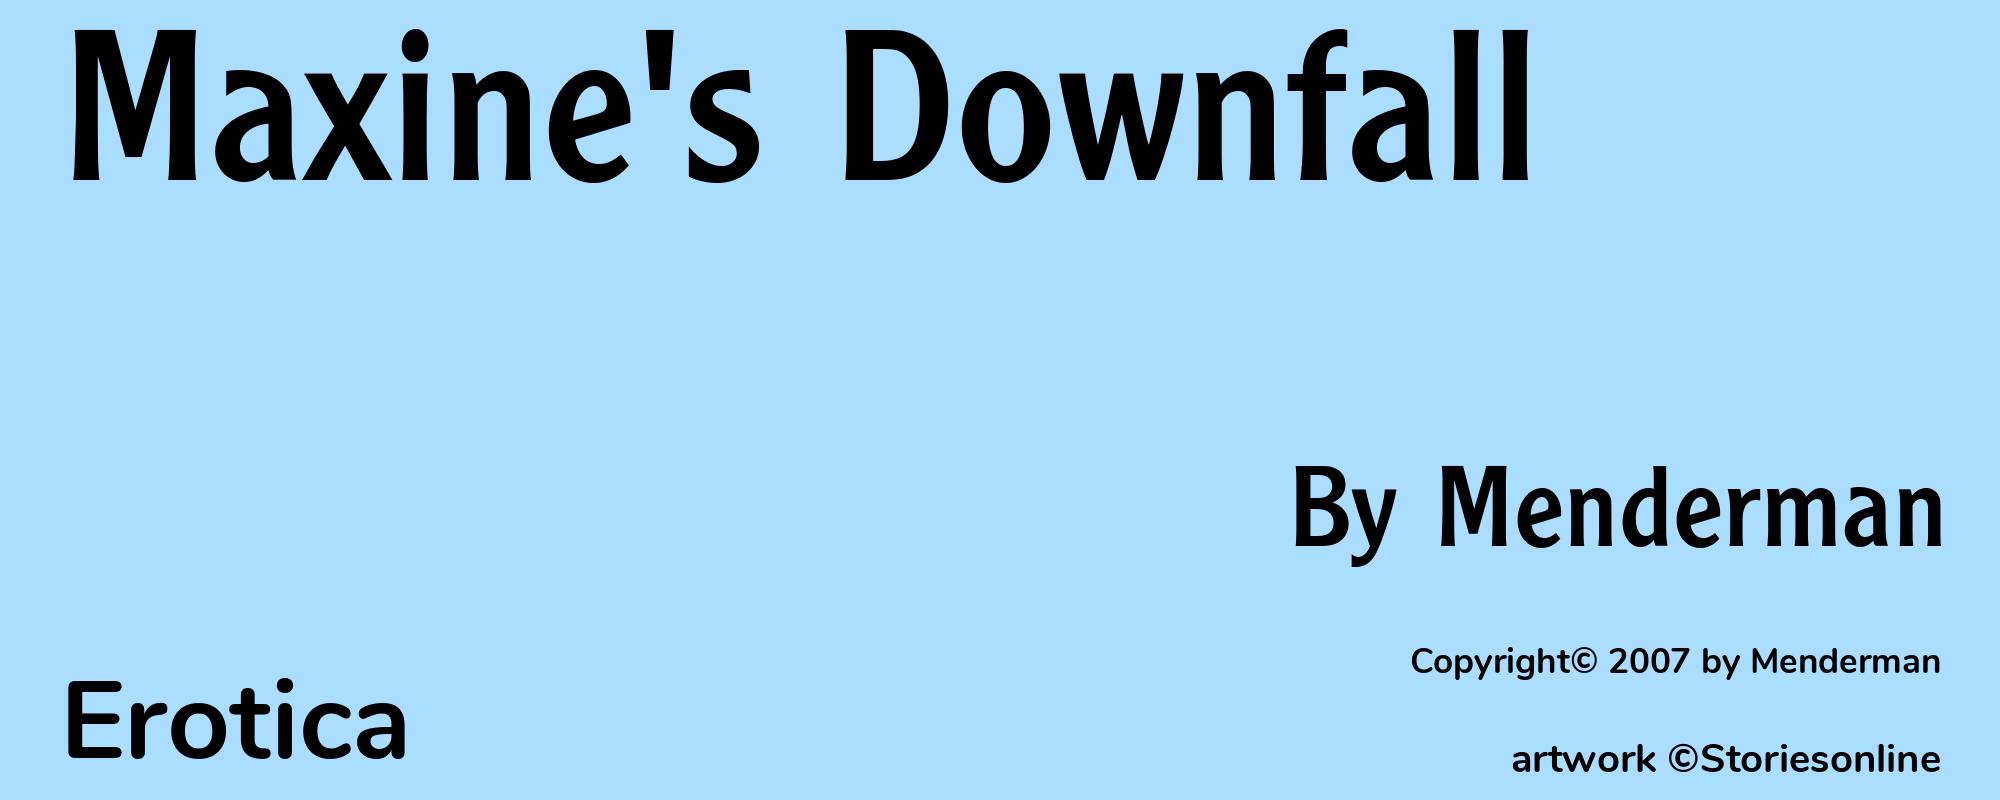 Maxine's Downfall - Cover